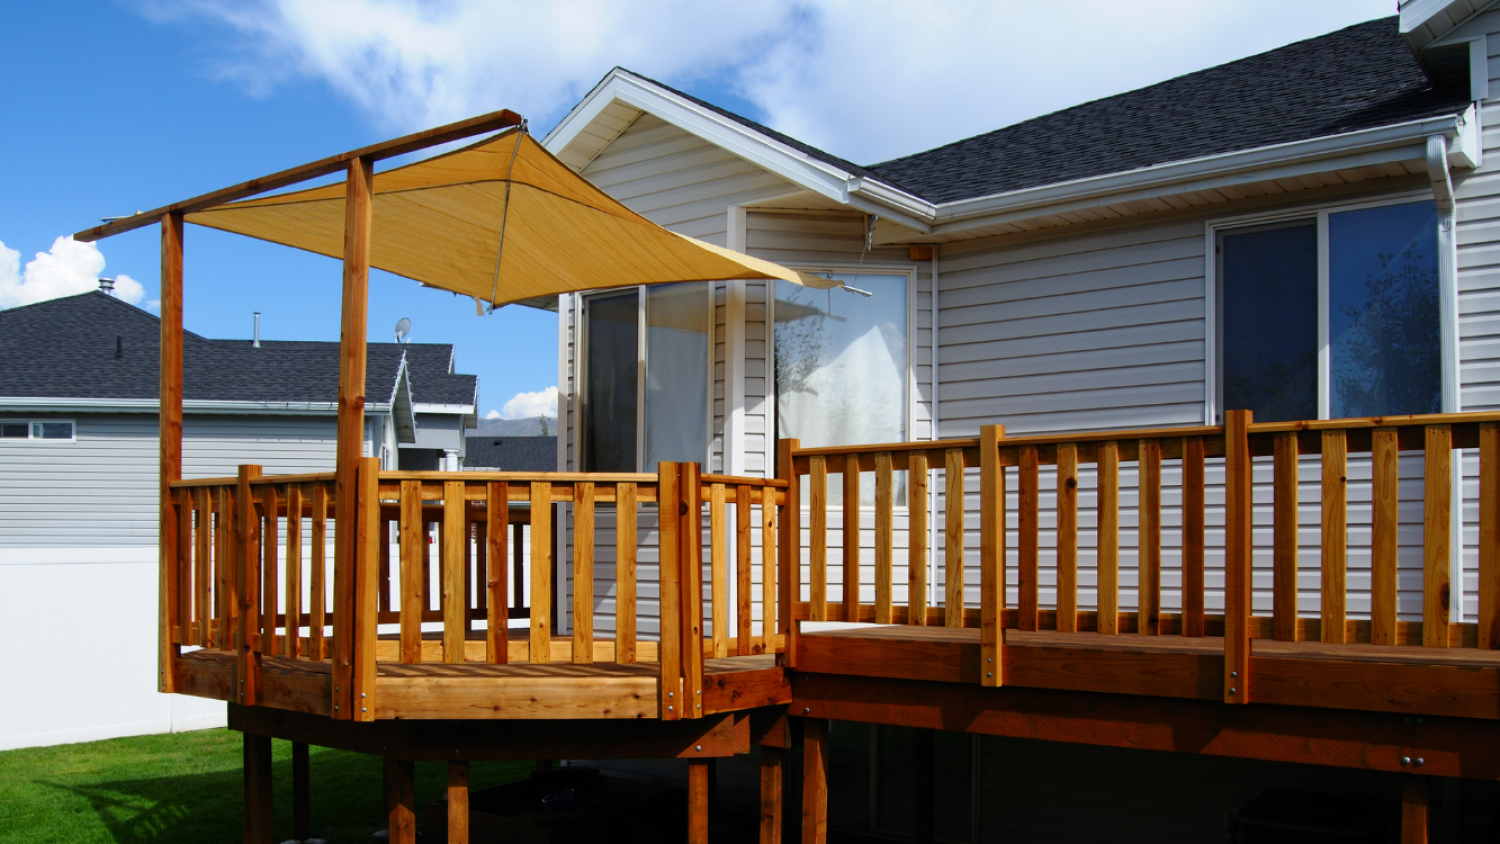 How To Choose The Best Deck Canopy For Your Backyard?